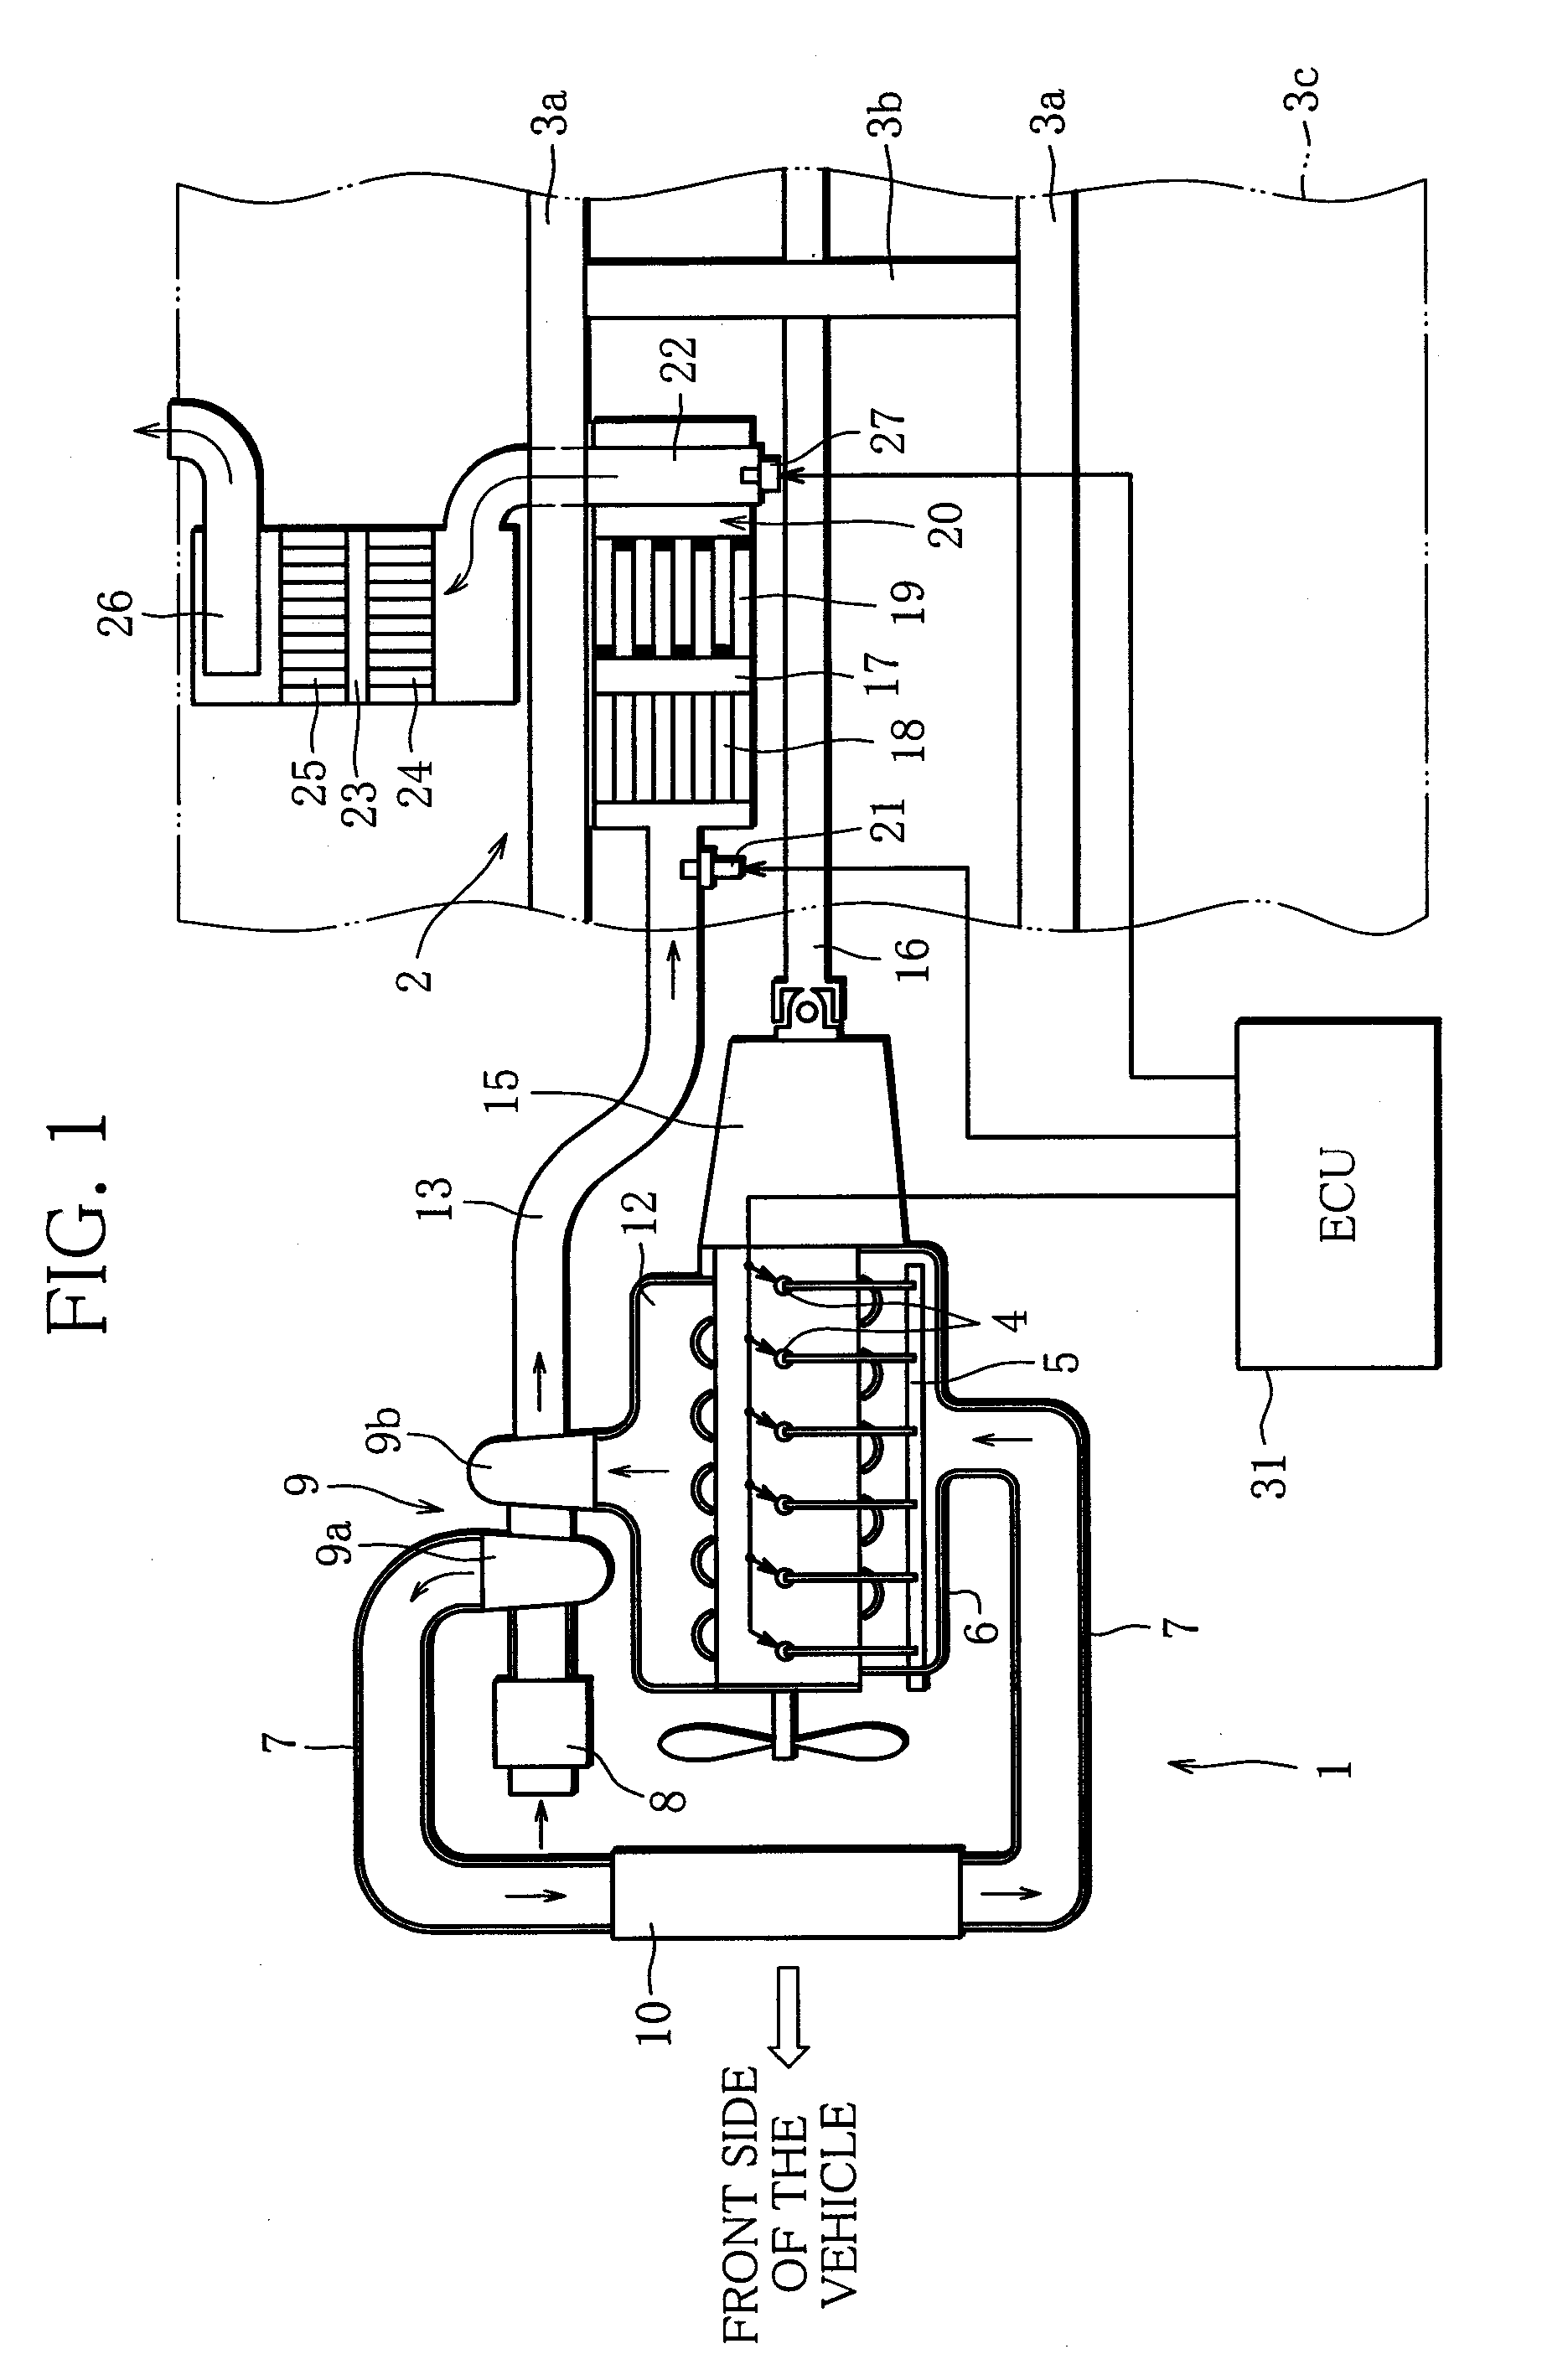 Exhaust purification apparatus for an engine